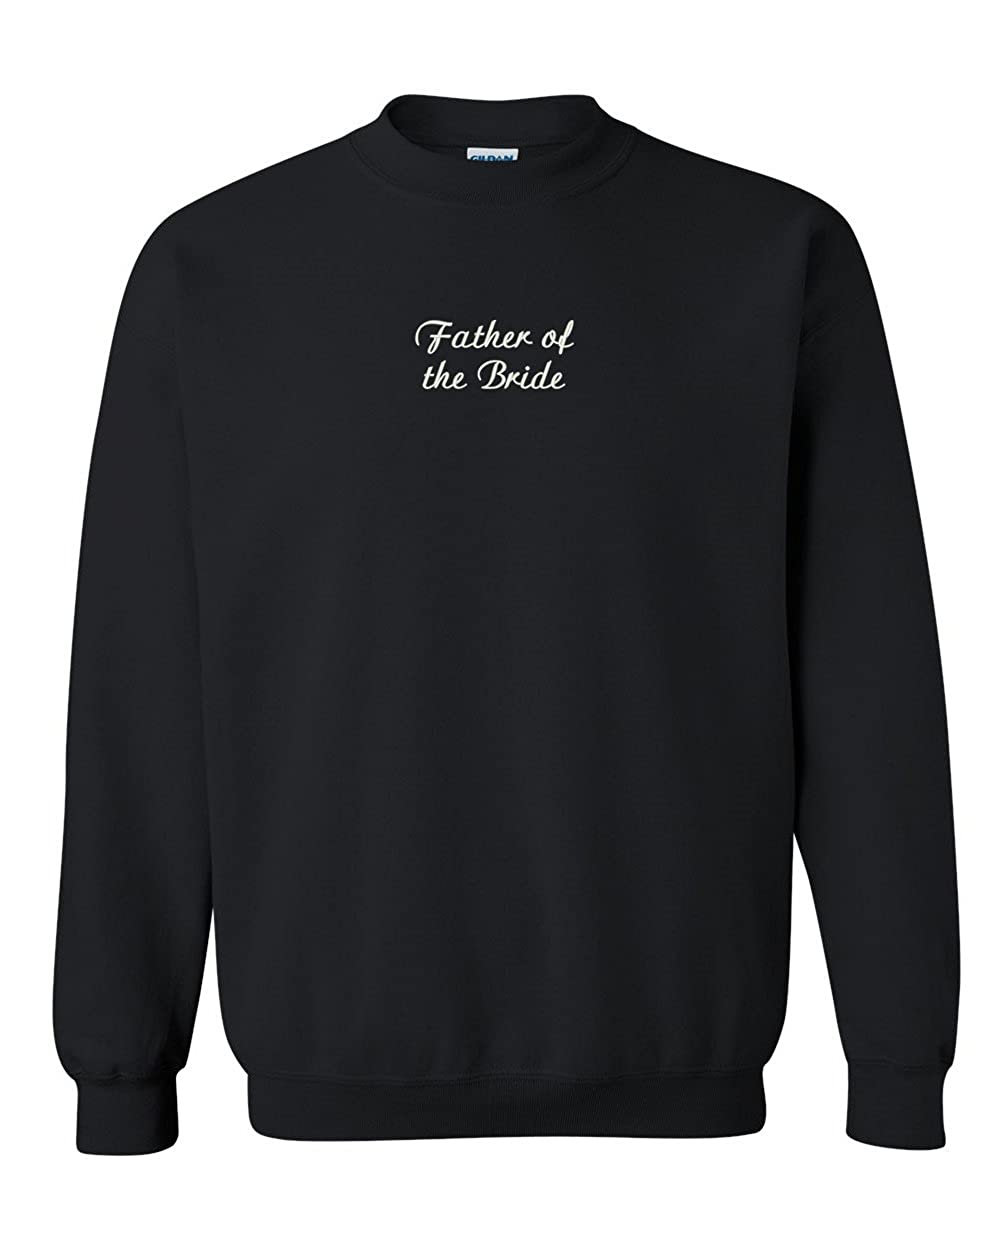 Trendy Apparel Shop Father Of The Bride Embroidered Crewneck Sweatshirt